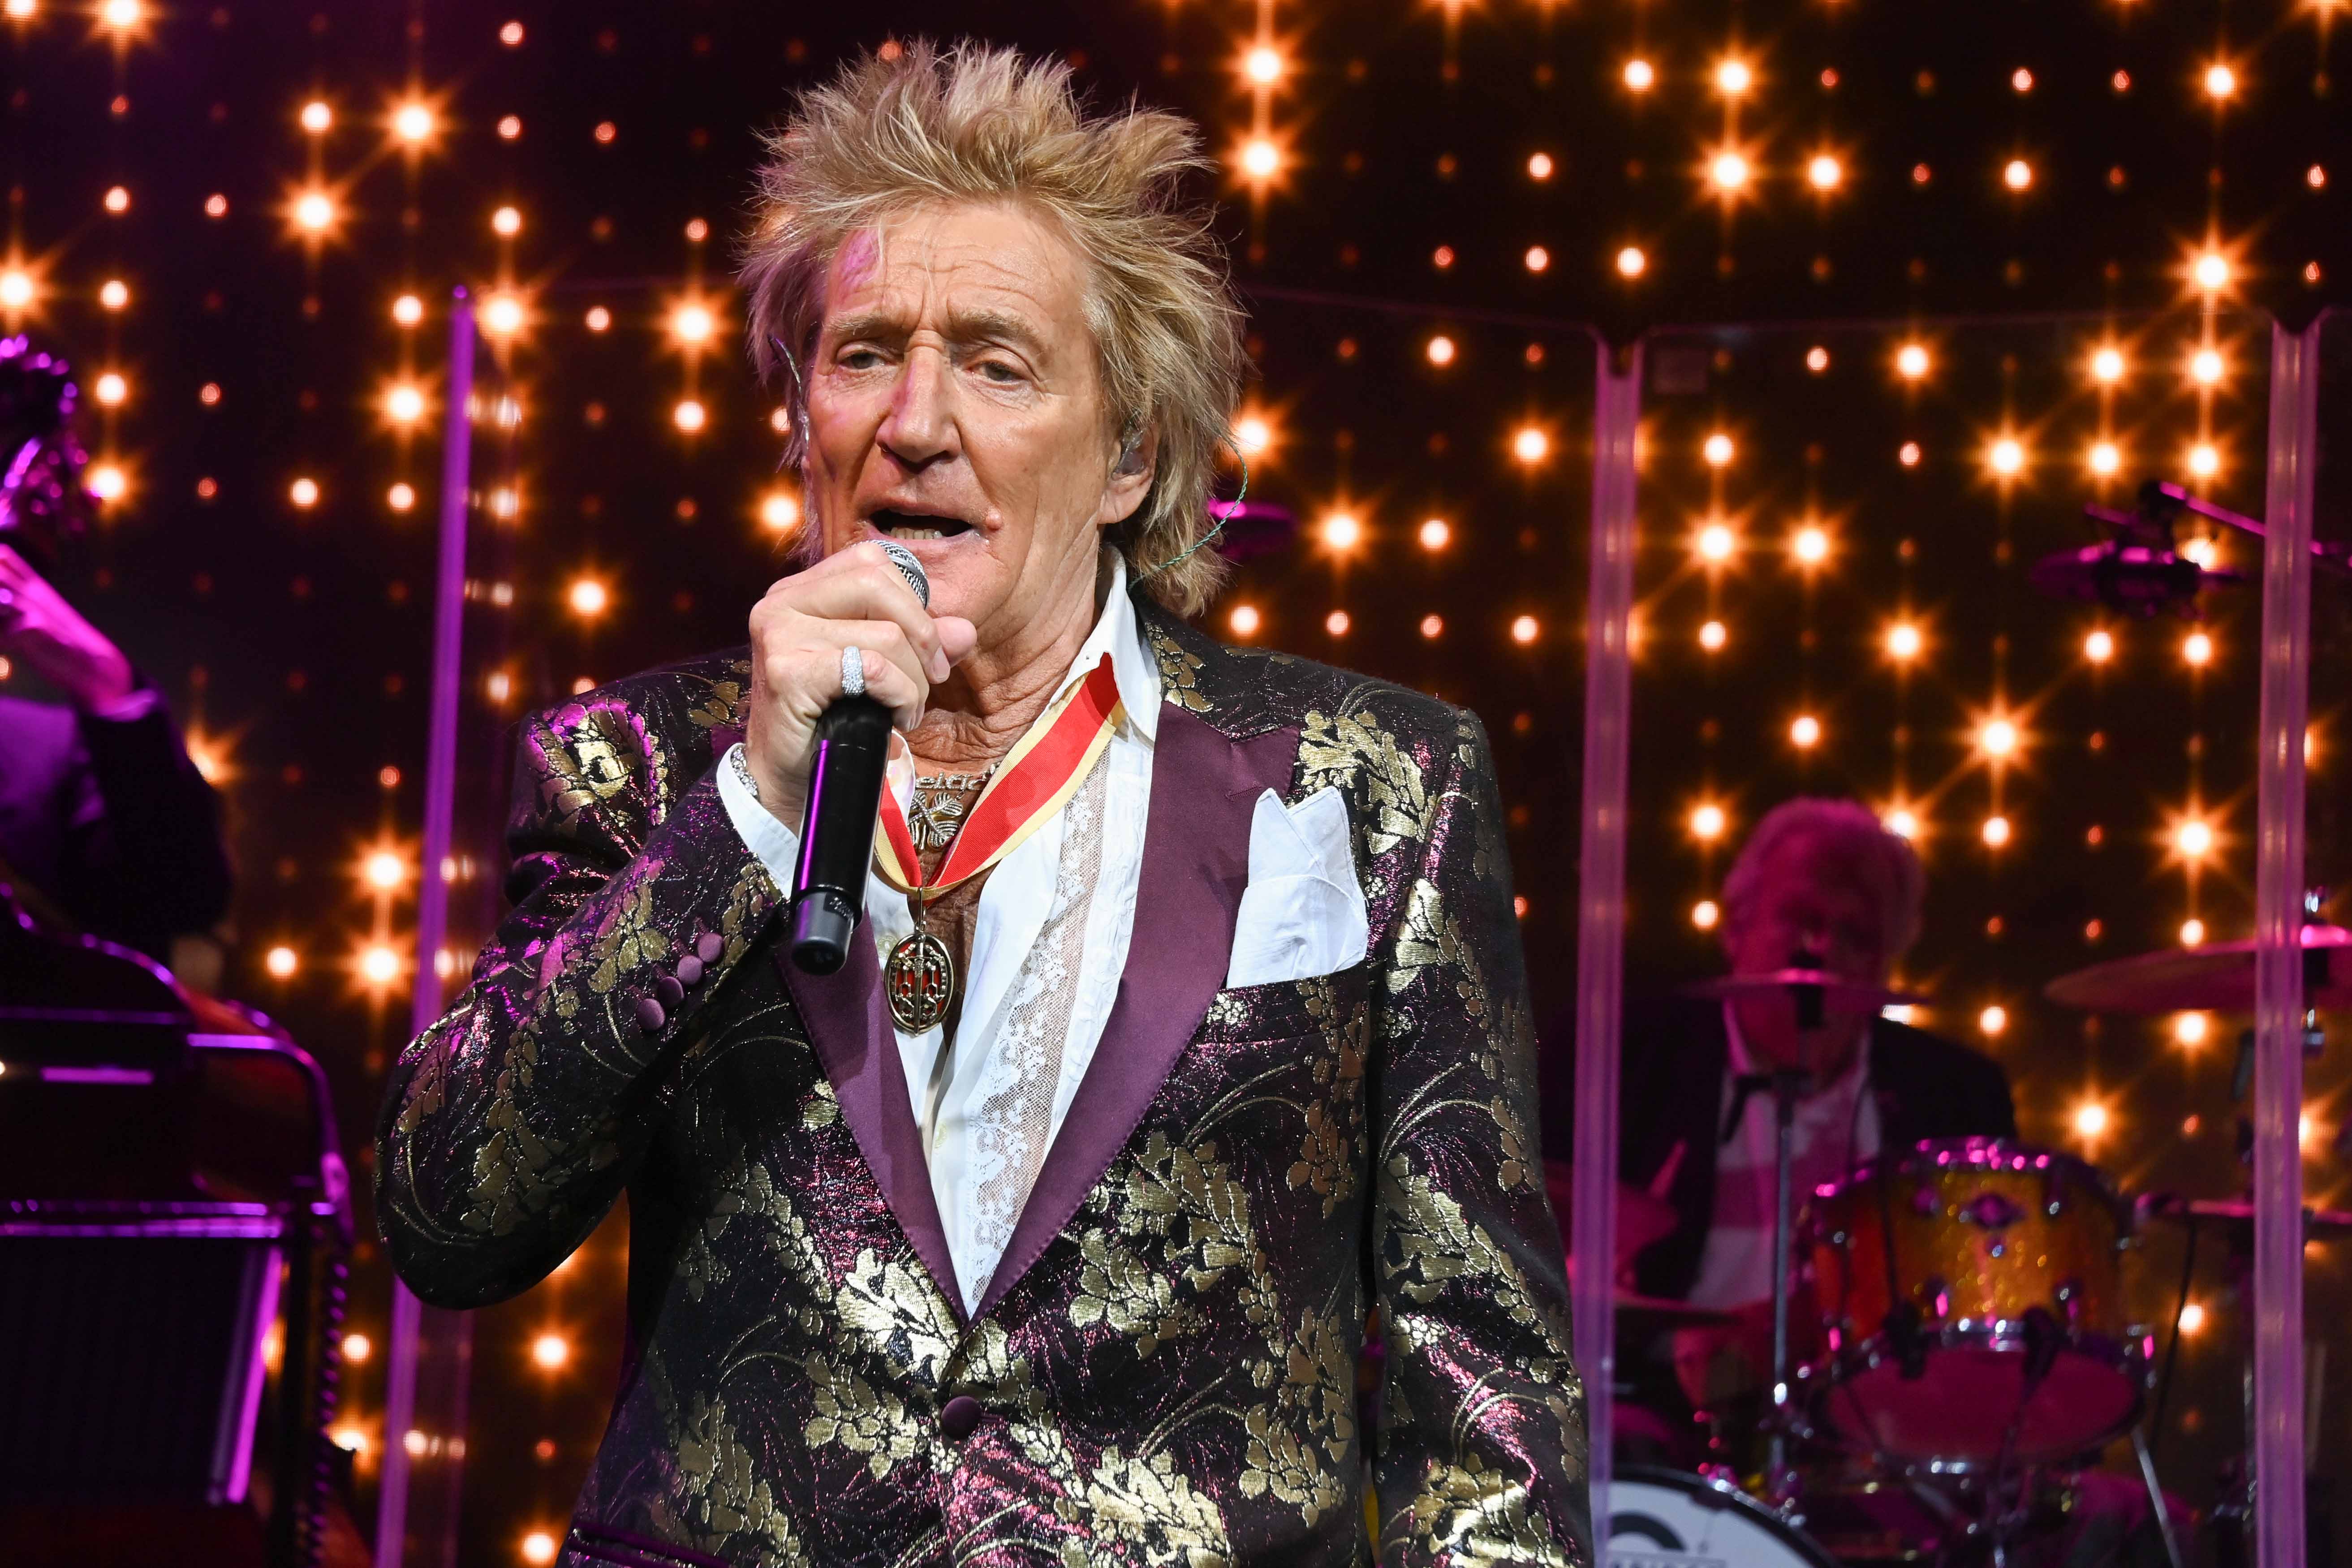 Rod Stewart Says His ‘Days Are Numbered’ Ahead of 80th Birthday: ‘I’ve Got No Fear’